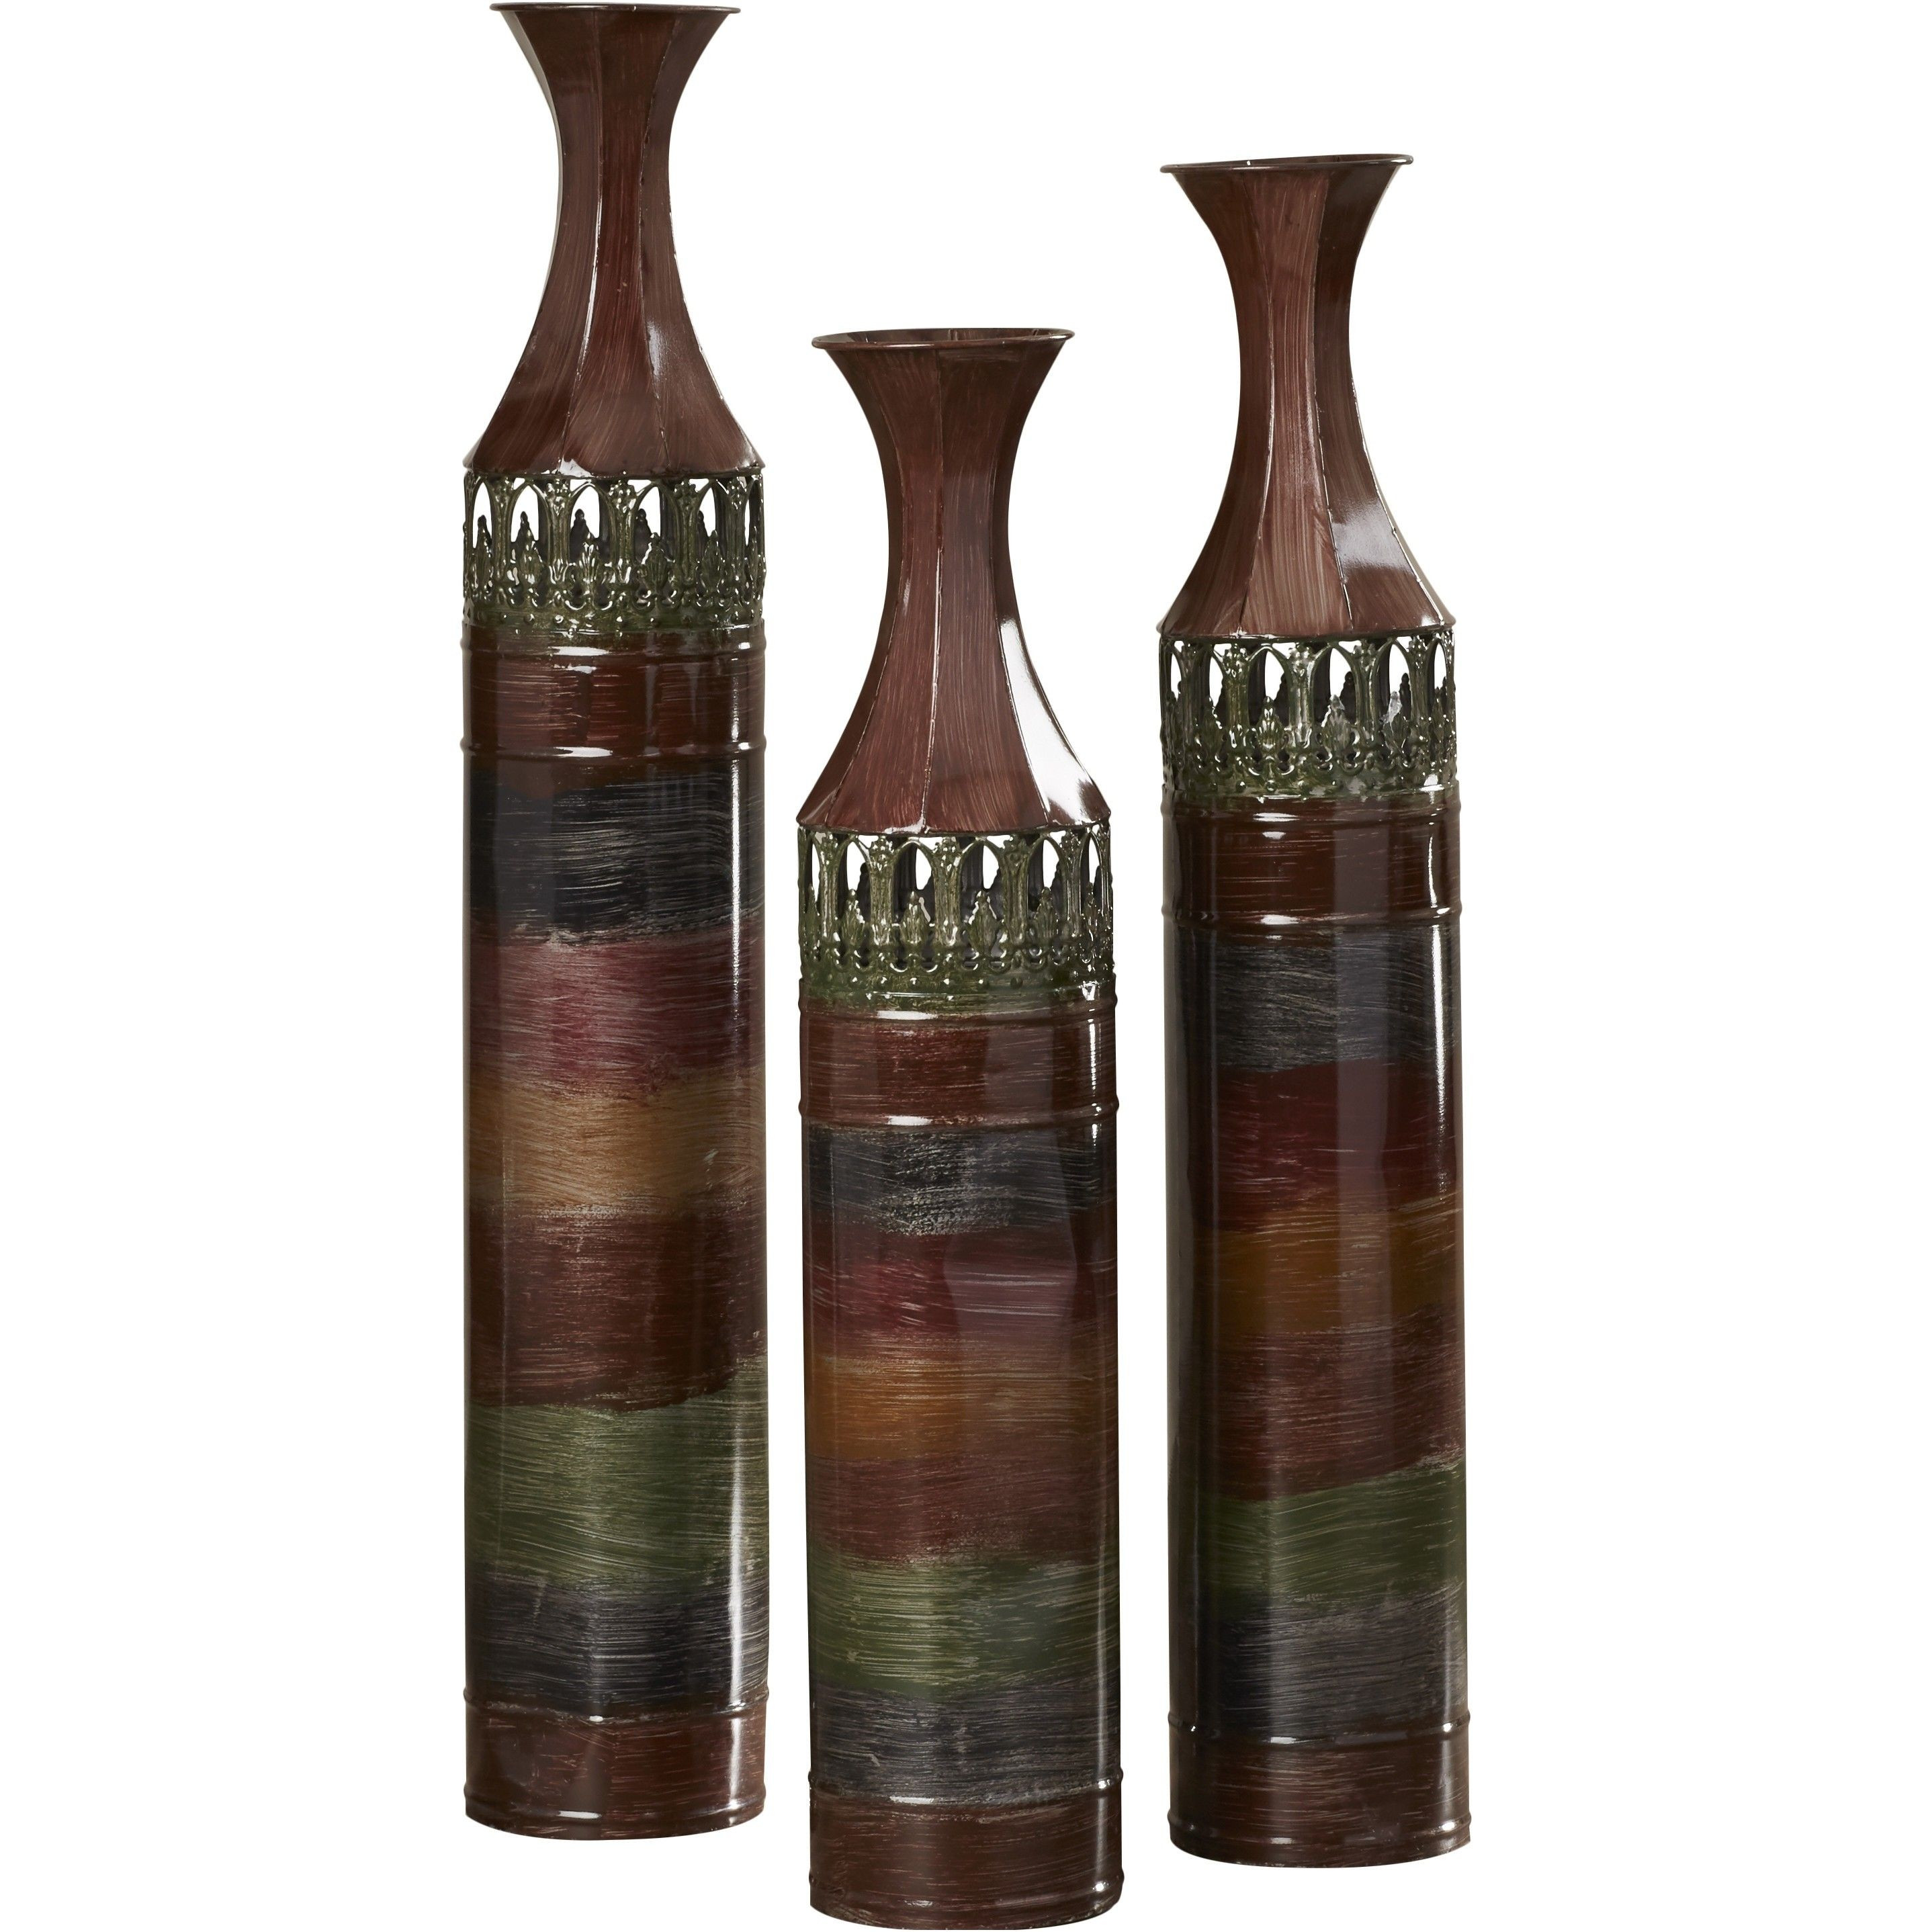 27 Fabulous Patina Floor Vase 2024 free download patina floor vase of 23 floor vases at home goods the weekly world with regard to home design tall decorative floor vases lovely vases floor vase